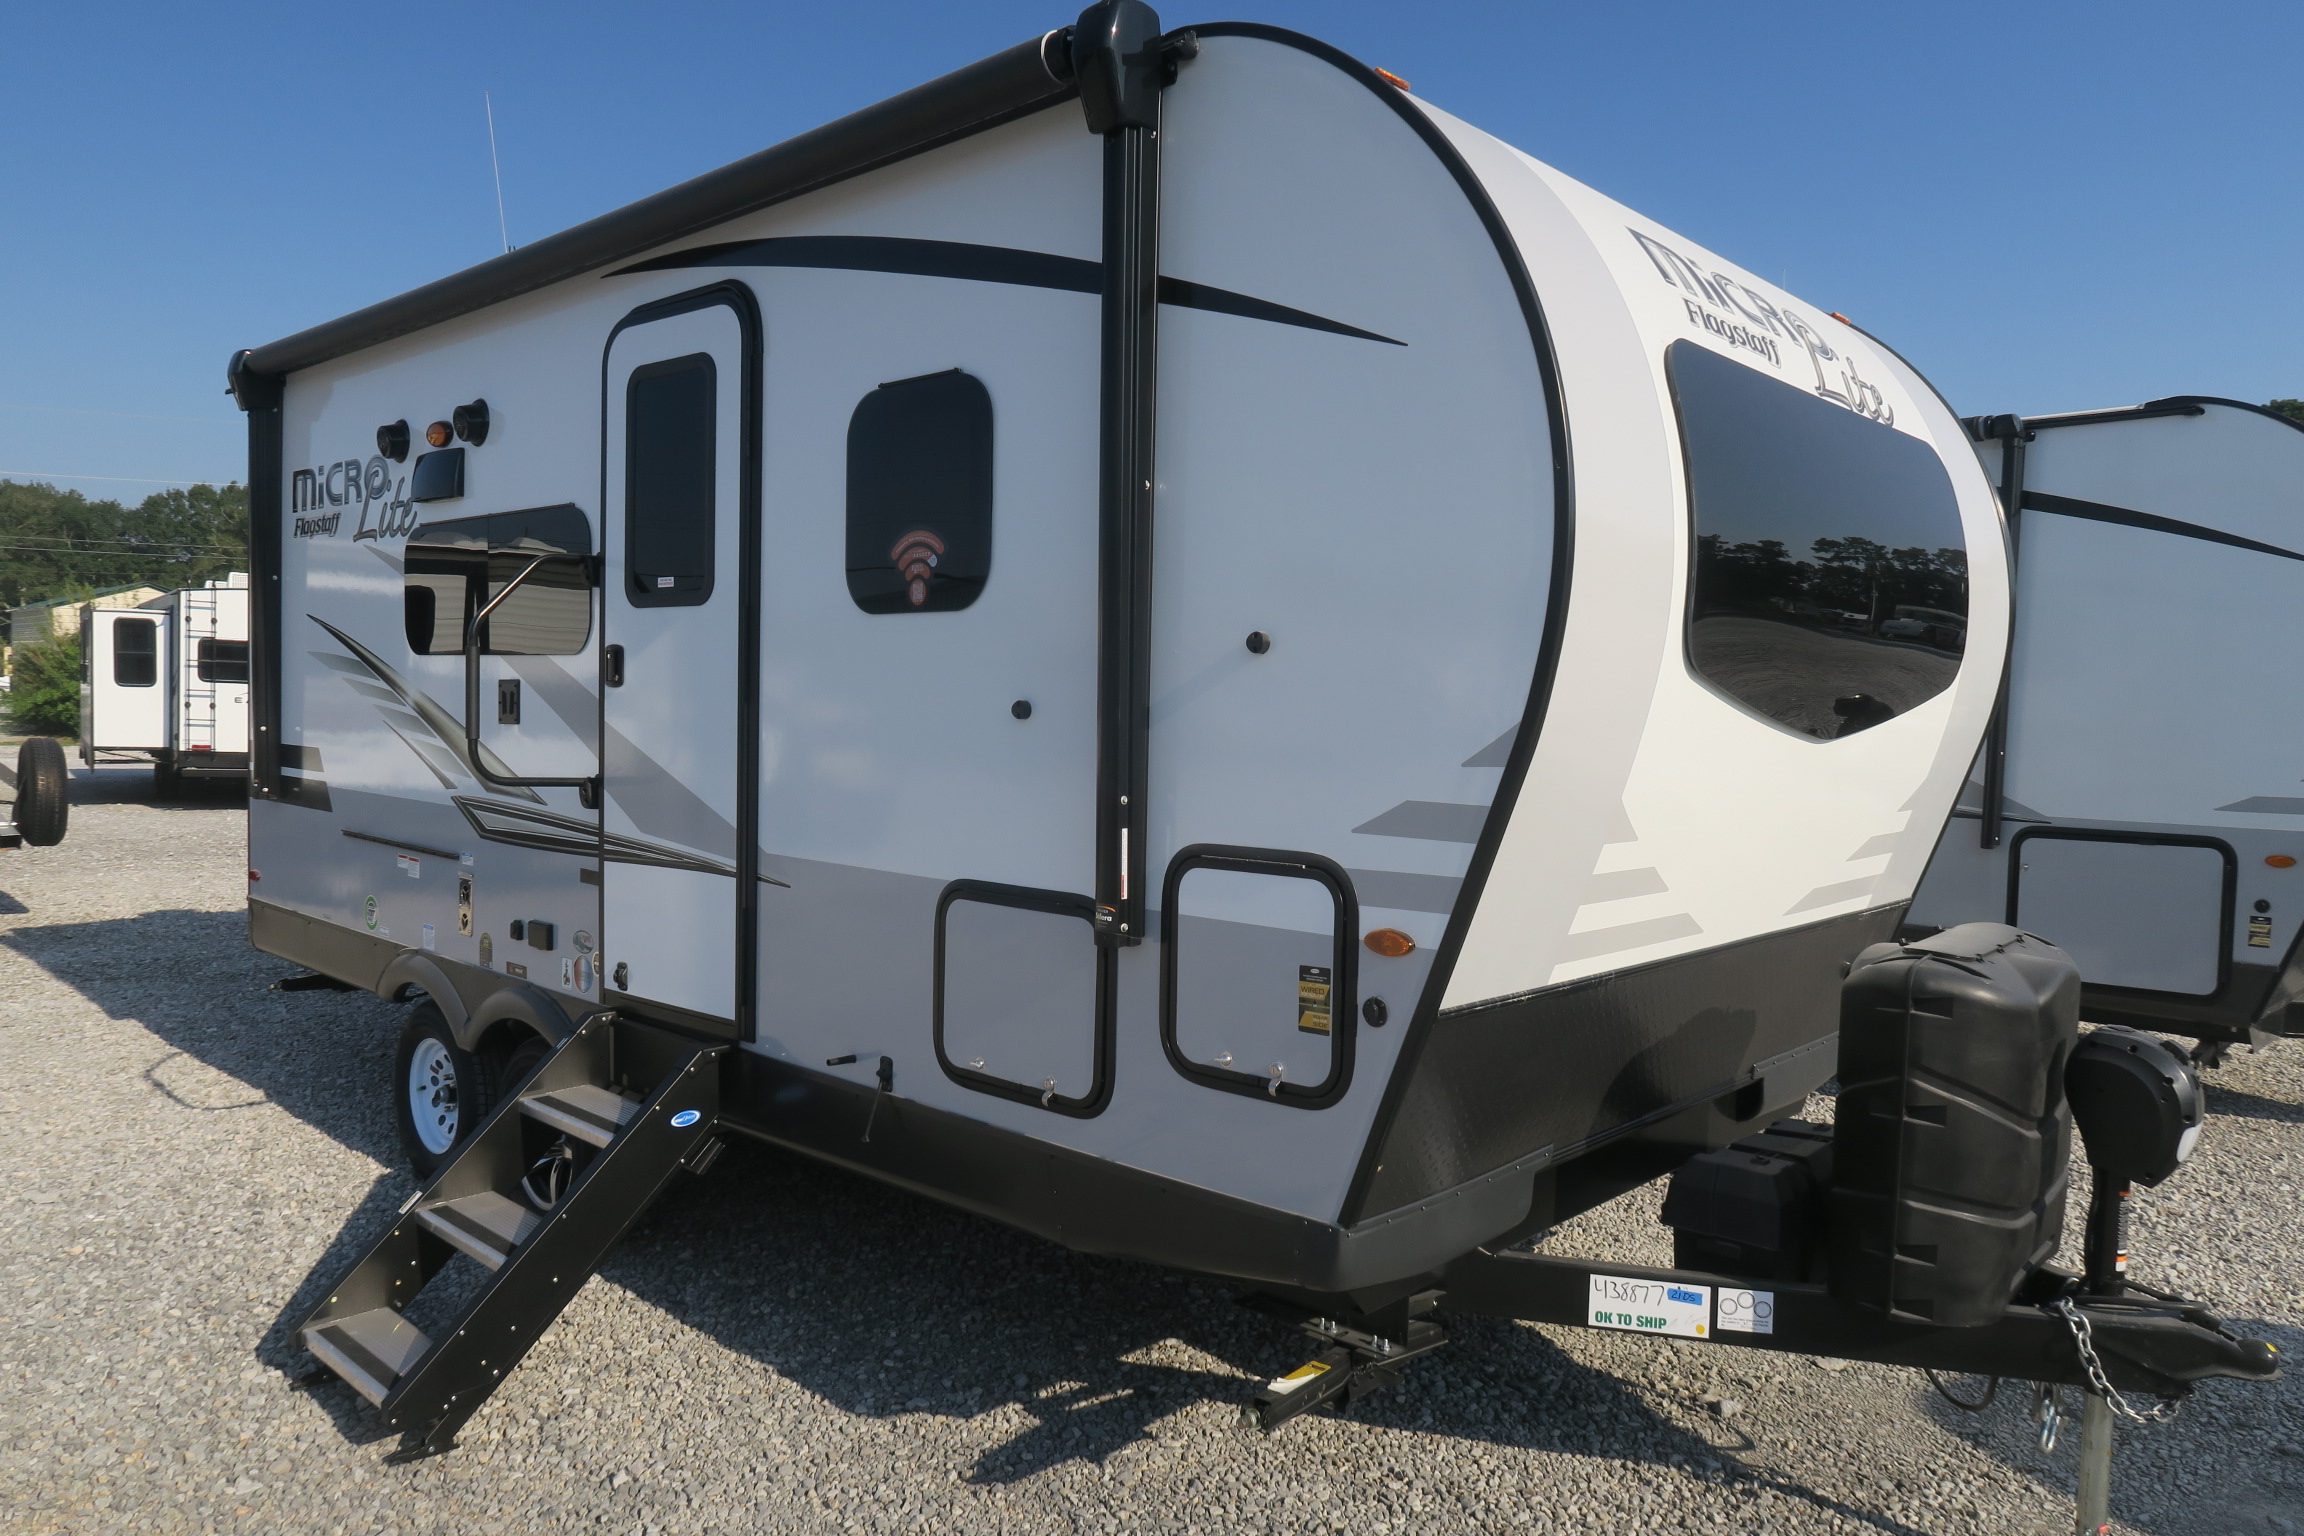 NEW 2021 FLAGSTAFF MICRO LITE 21DS - Overview | Berryland Campers